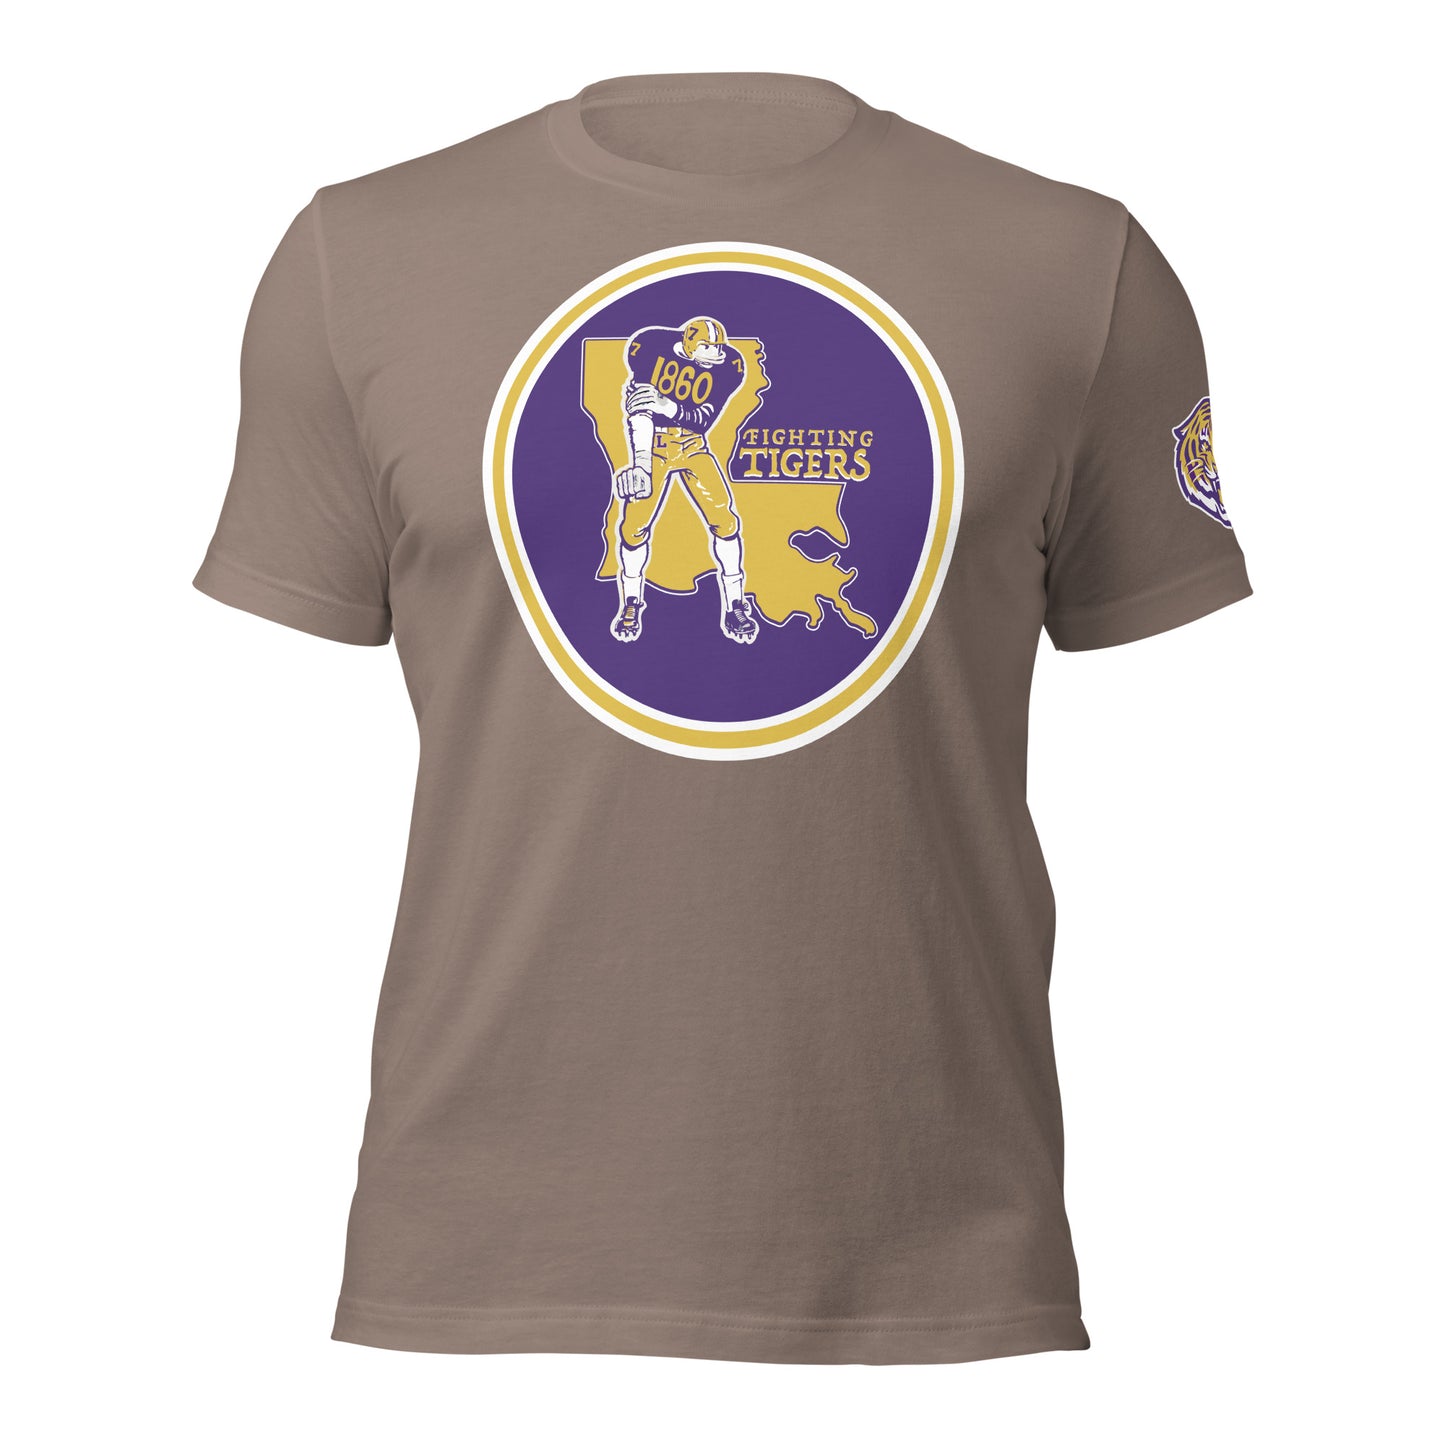 FIGHTING TIGERS SEAL - TIGER ON SLEEVE - BELLA+CANVAS - Unisex t-shirt